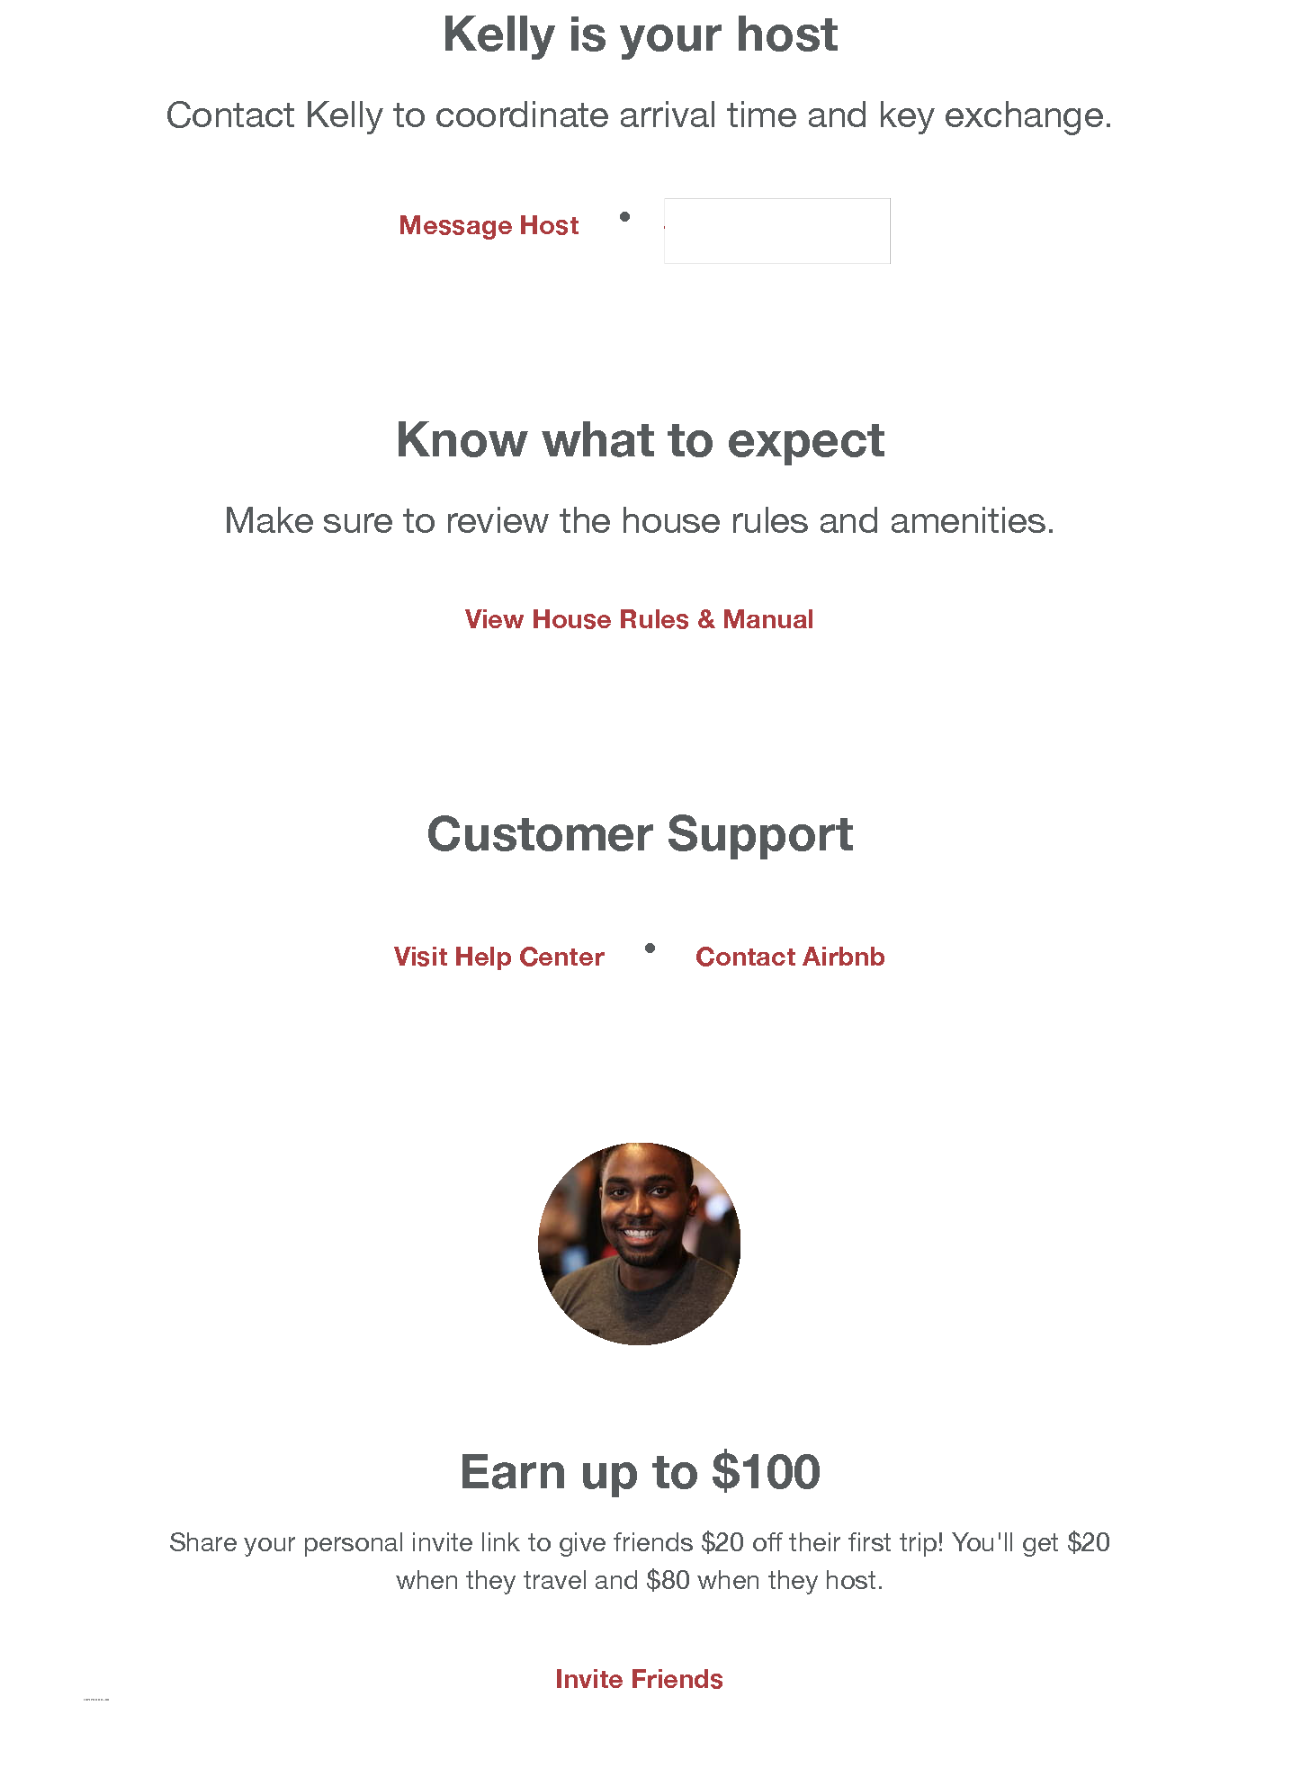 Airbnb email with referral bonus.